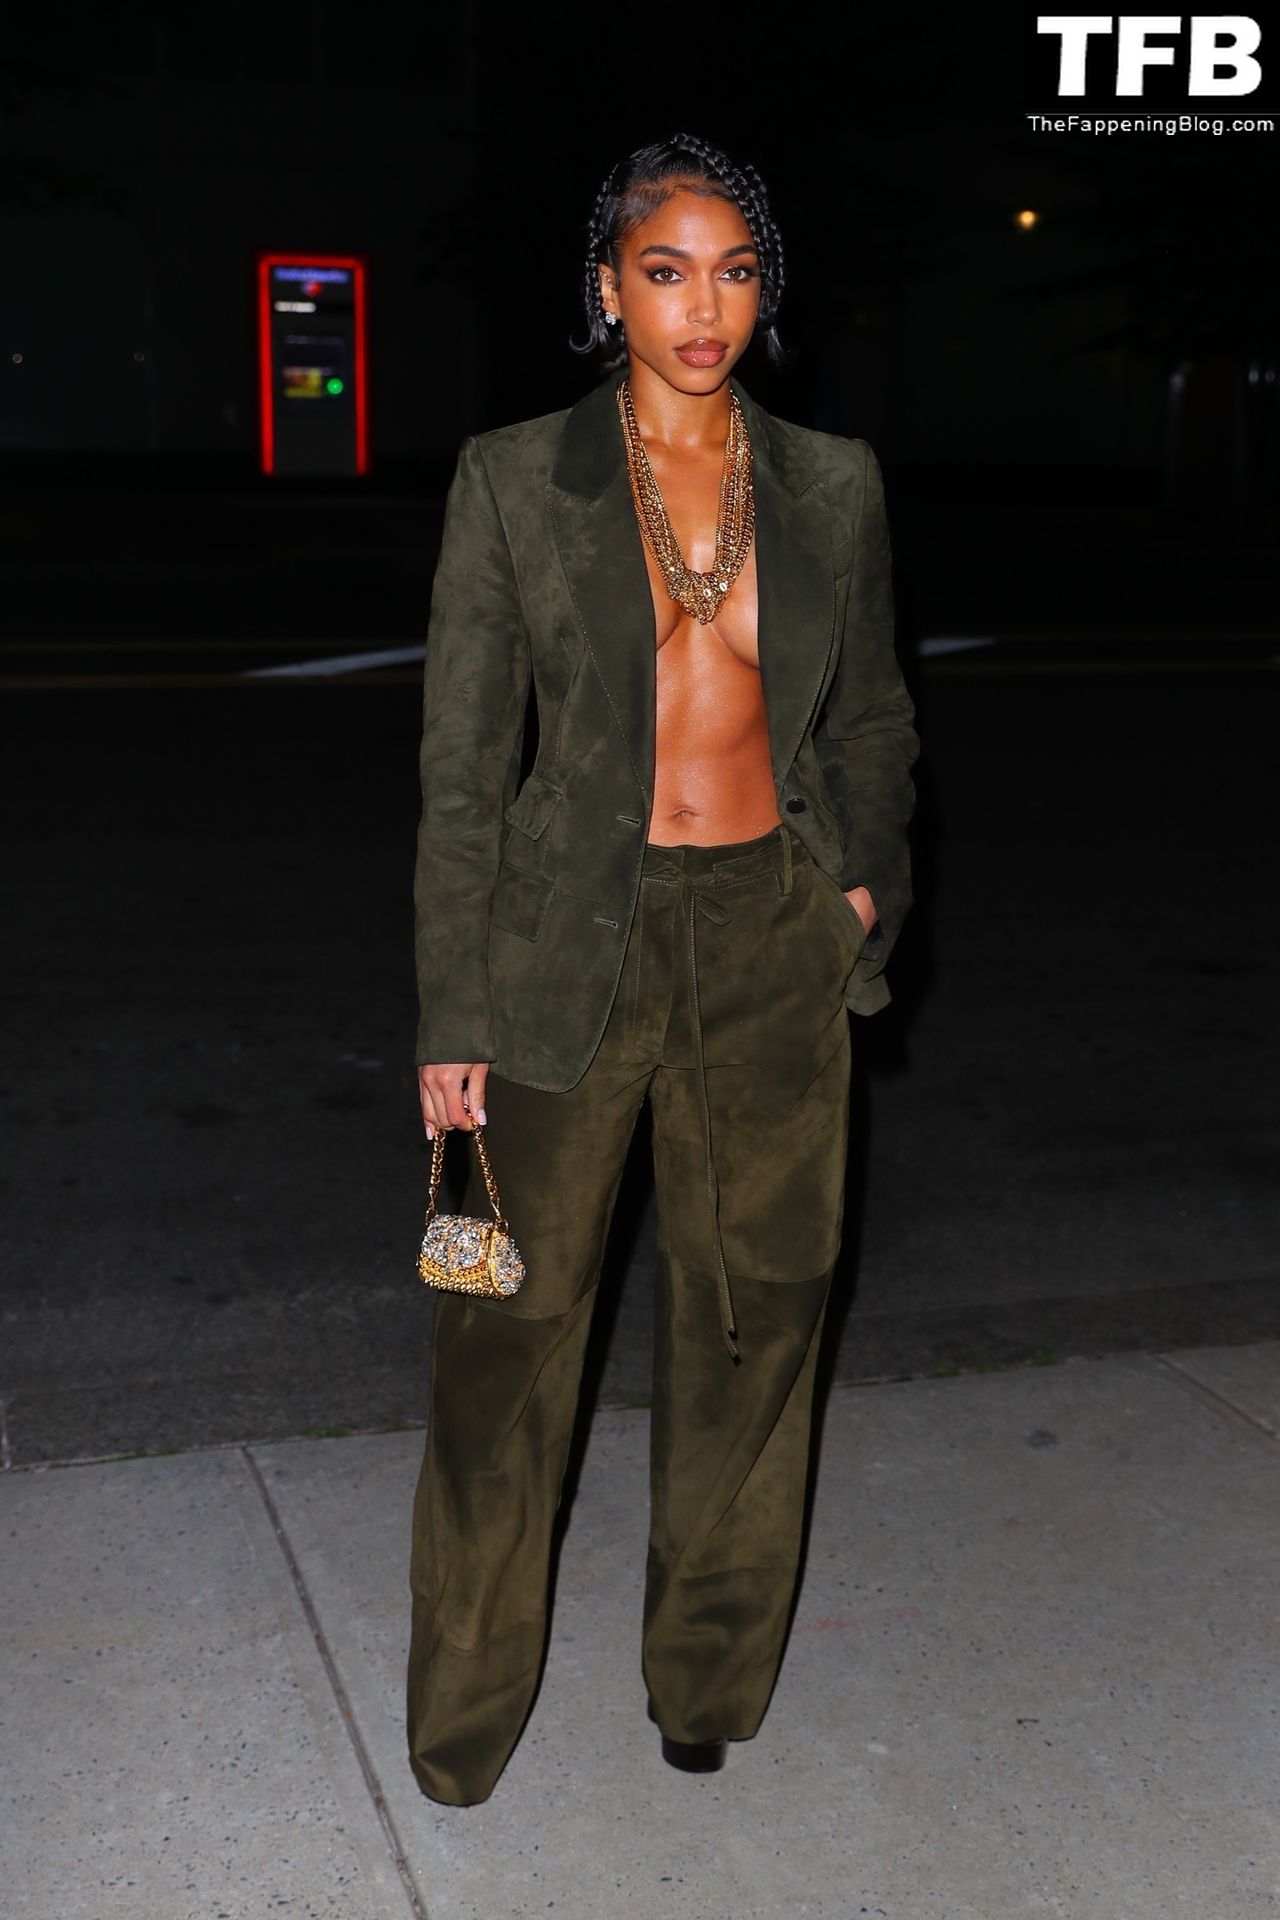 Lori Harvey Sexy The Fappening Blog 31 - Lori Harvey Shows Off Her Tits at the Tom Ford Fashion Show (38 Photos)